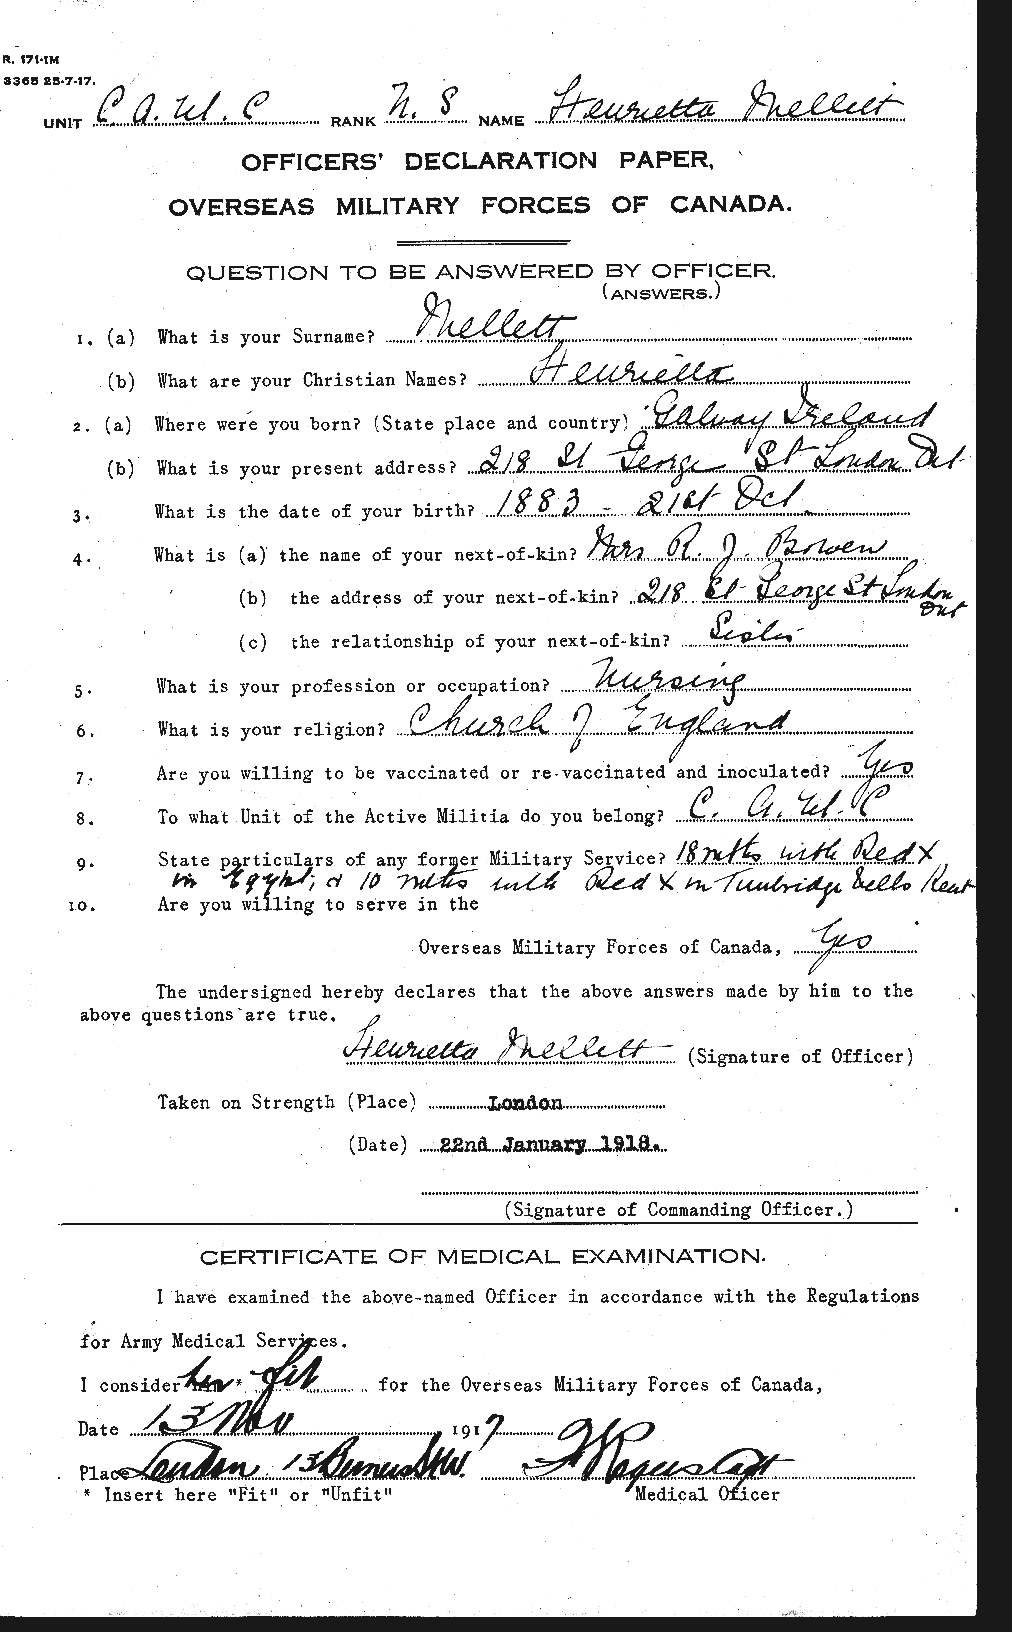 Personnel Records of the First World War - CEF 237302a